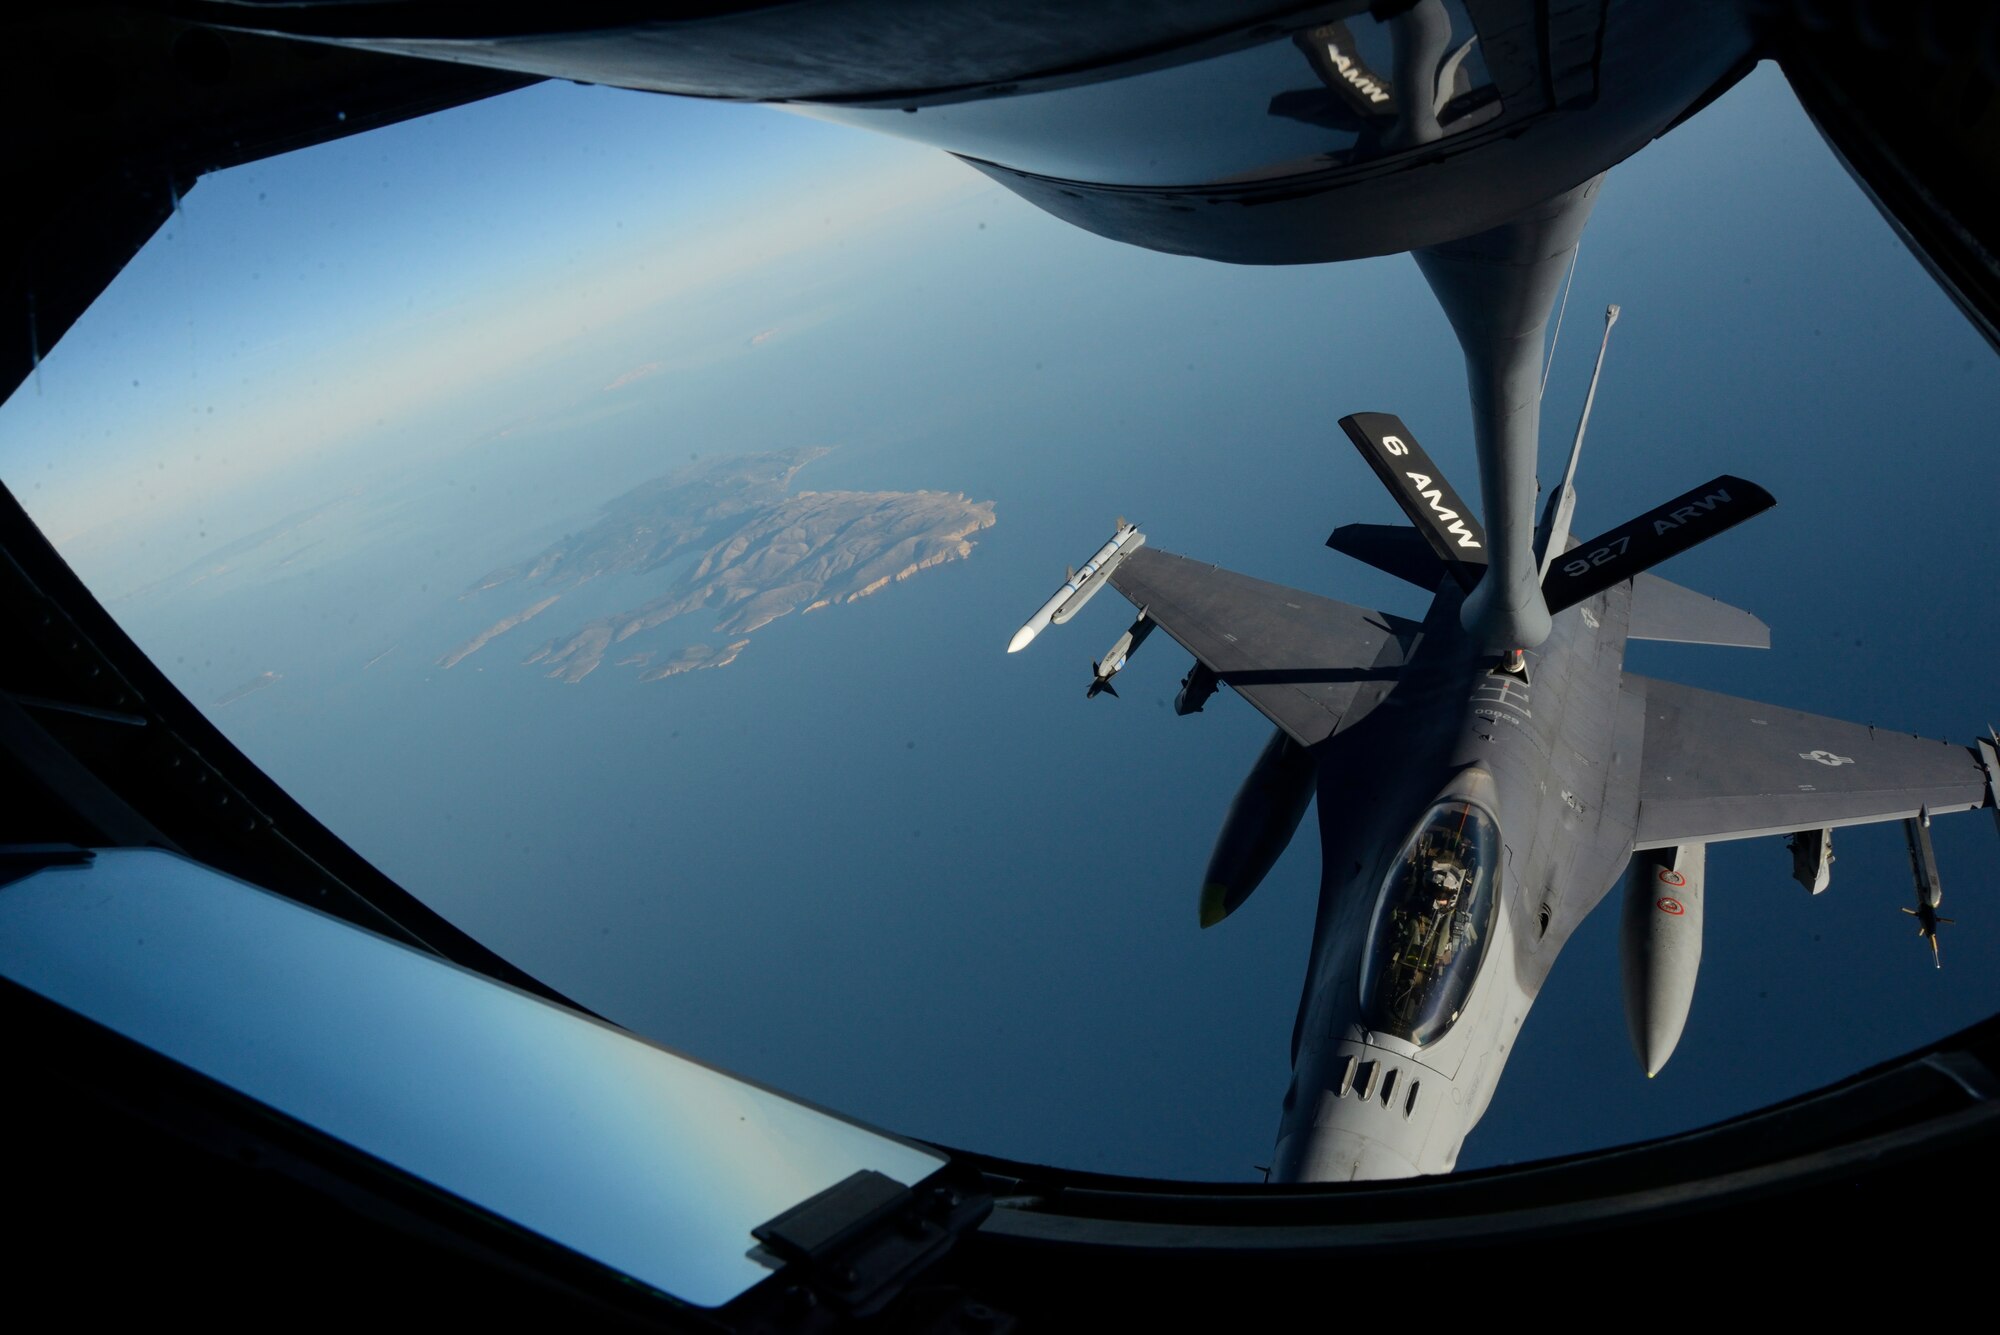 A KC-135 Stratotanker assigned to the 63rd Air Refueling Squadron, 927th Operations Group at MacDill Air Force Base, Fla., refuels an F-16 Fighting Falcon fighter aircraft assigned to the 480th Expeditionary Fighter Squadron, Spangdahlem Air Base, Germany, during a flying training deployment at Souda Bay, Greece, Feb. 2, 2016. The 63rd ARS is operating out of Souda Bay Naval Air Station for the duration of the FTD. (U.S. Air Force photo by Staff Sgt. Christopher Ruano/Released)